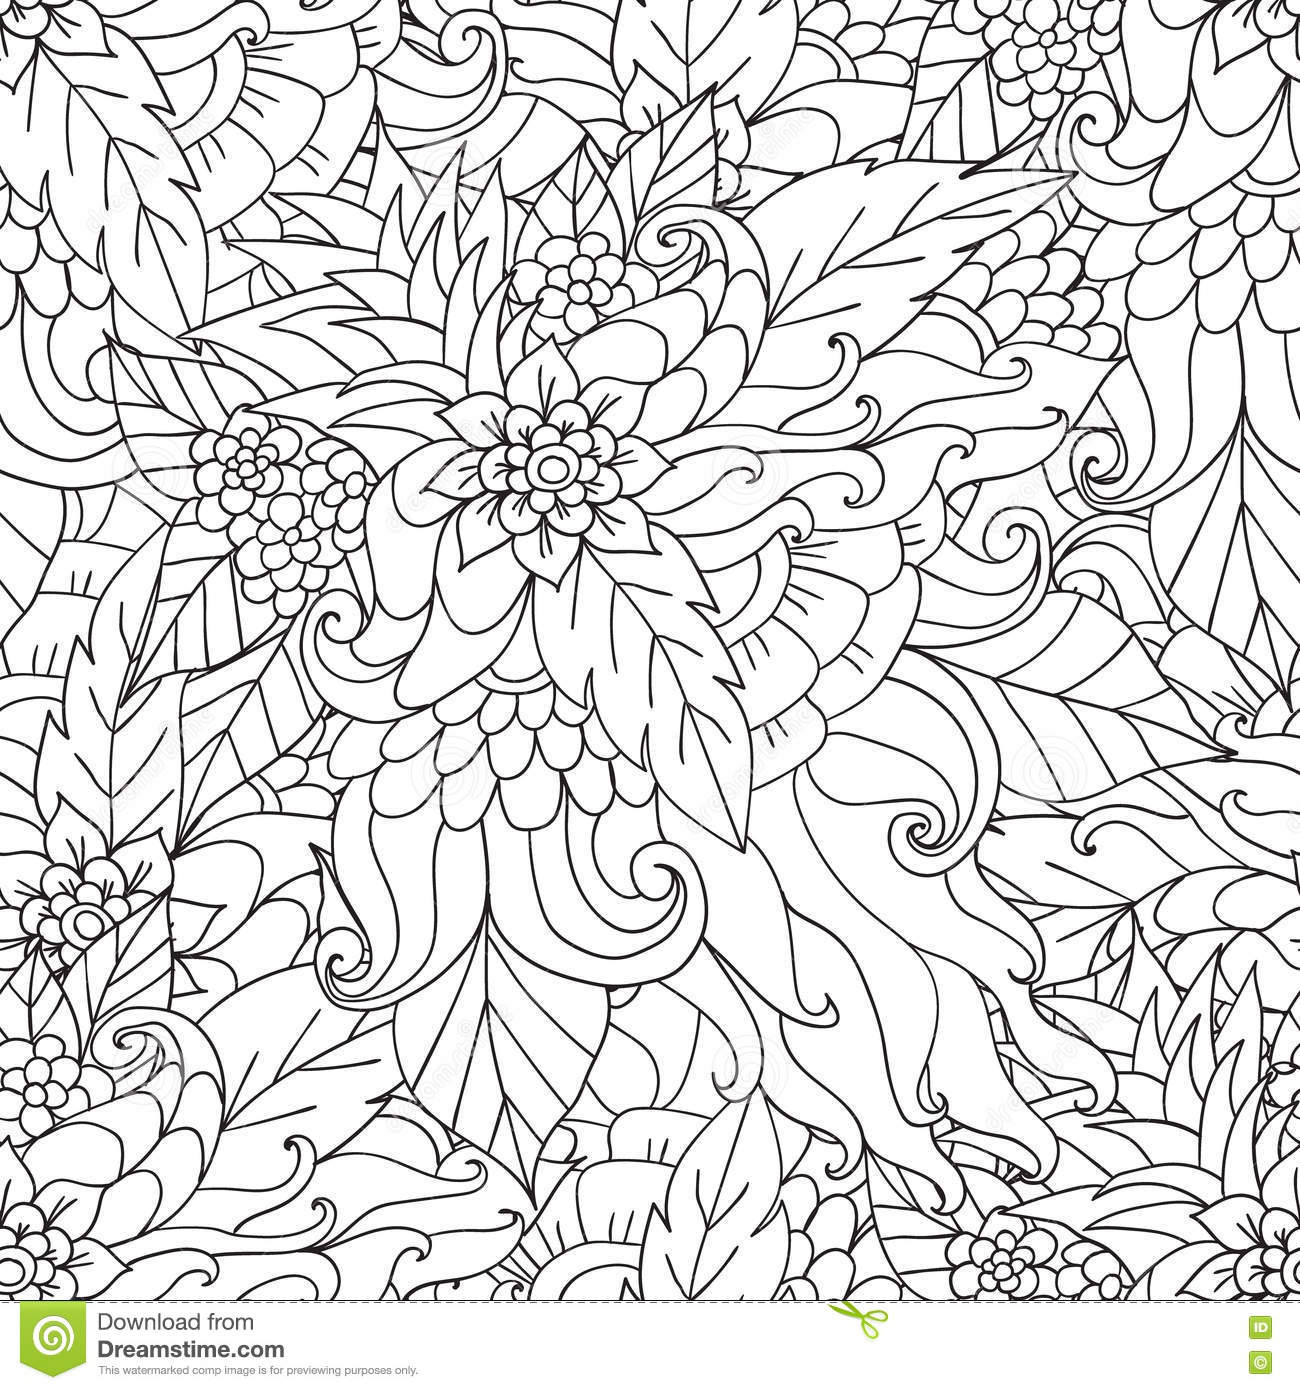 Nature Coloring Pages For Adults
 Coloring Pages For Adults Decorative Hand Drawn Doodle